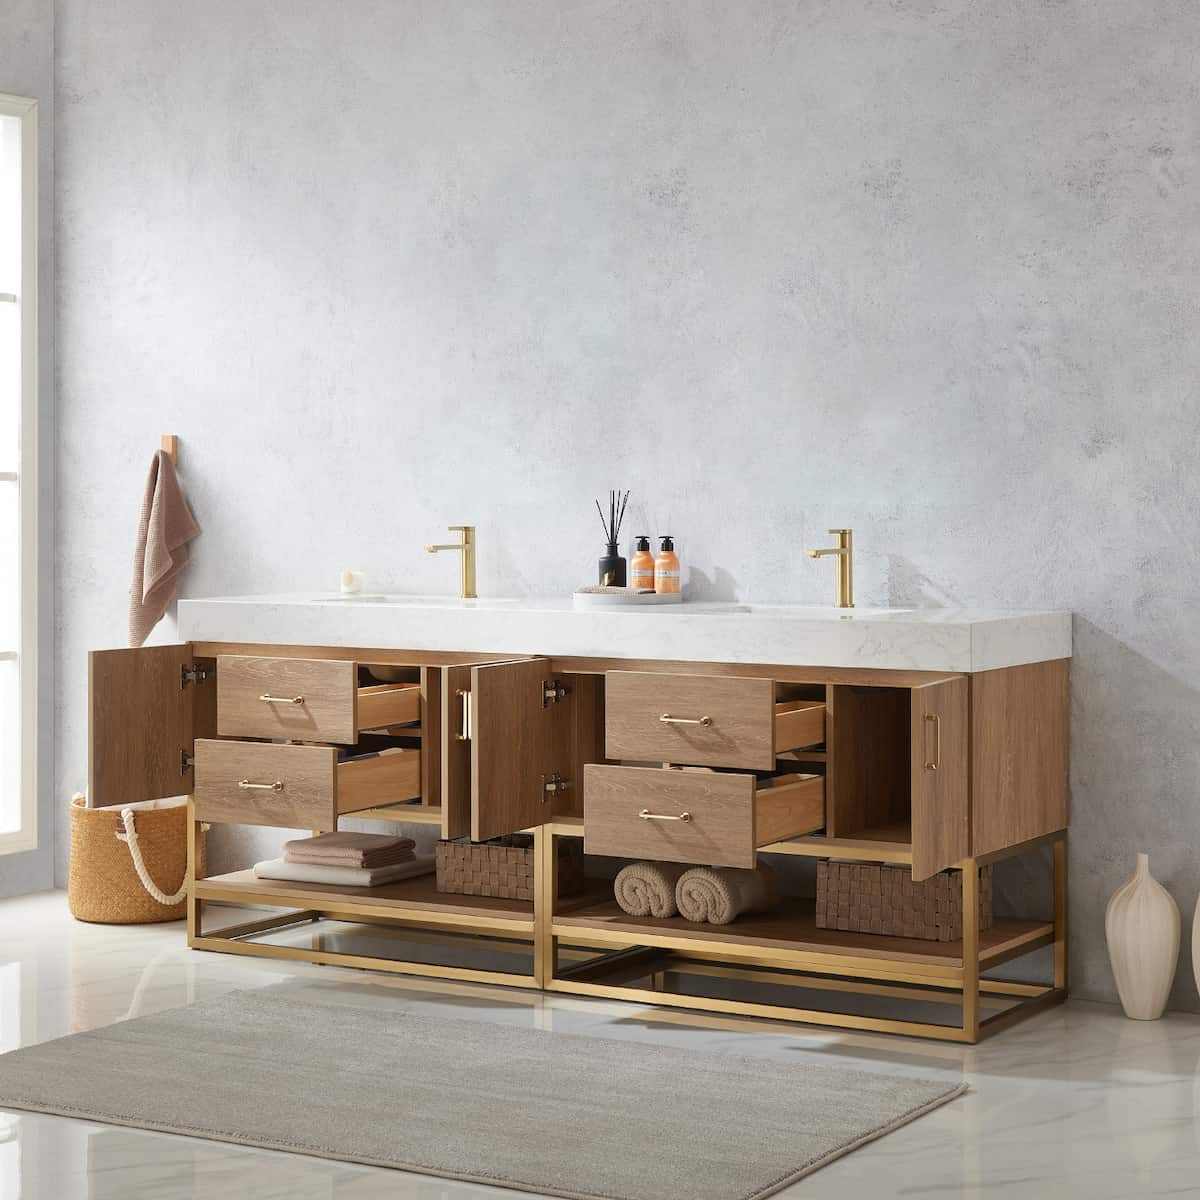 Vinnova Alistair 84 Inch Freestanding Double Vanity in North American Oak and Brushed Gold Frame with White Grain Stone Countertop Without Mirrors Inside 789084-NO-GW-NM